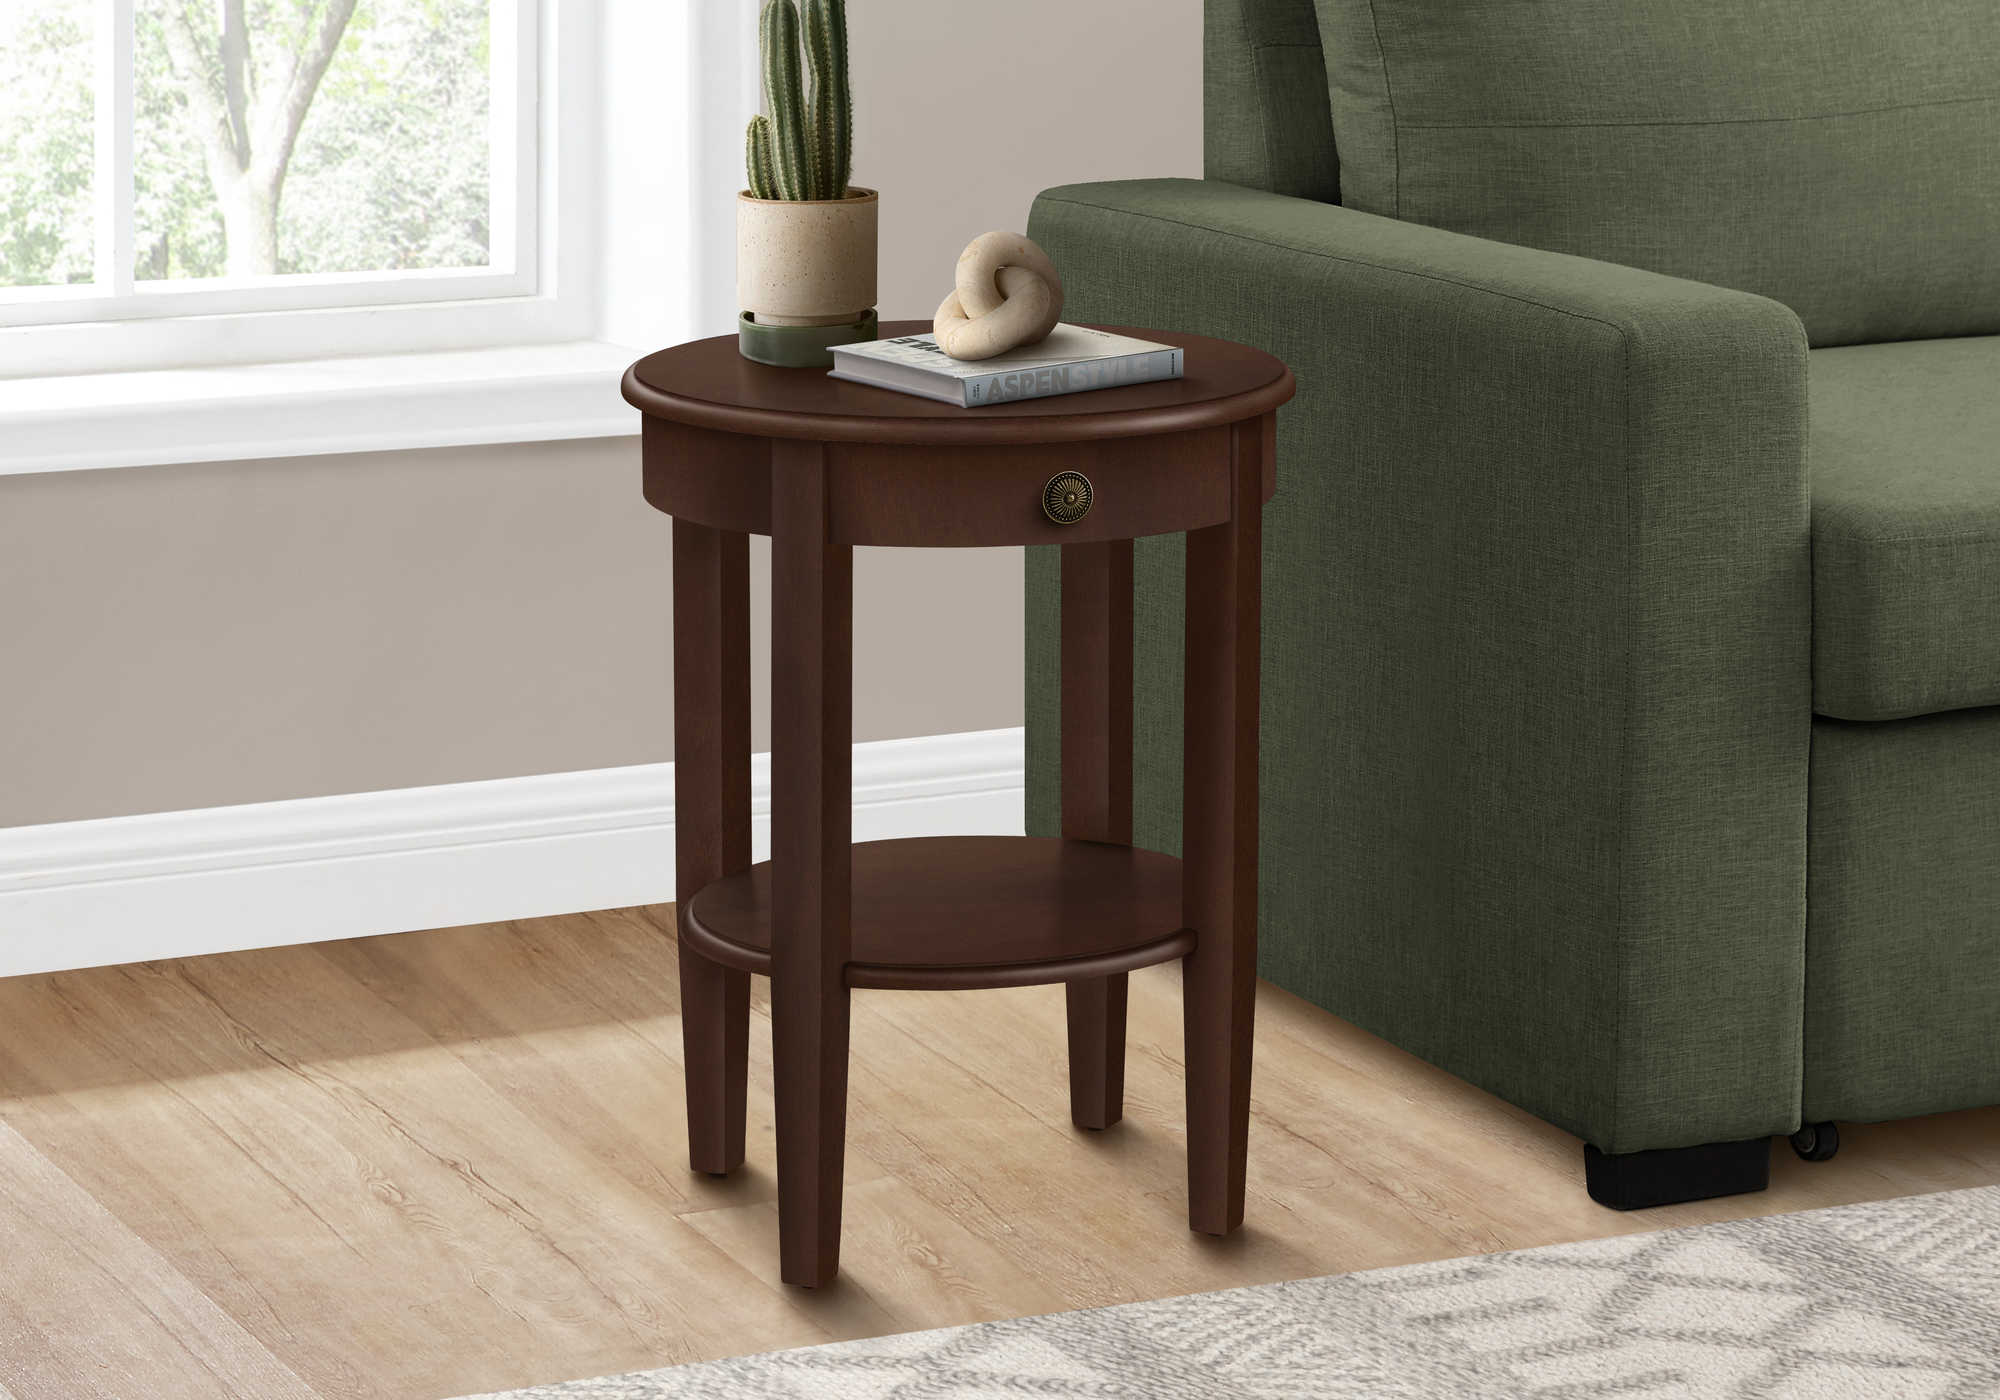 ACCENT TABLE - 23"H / ESPRESSO VENEER END TABLE